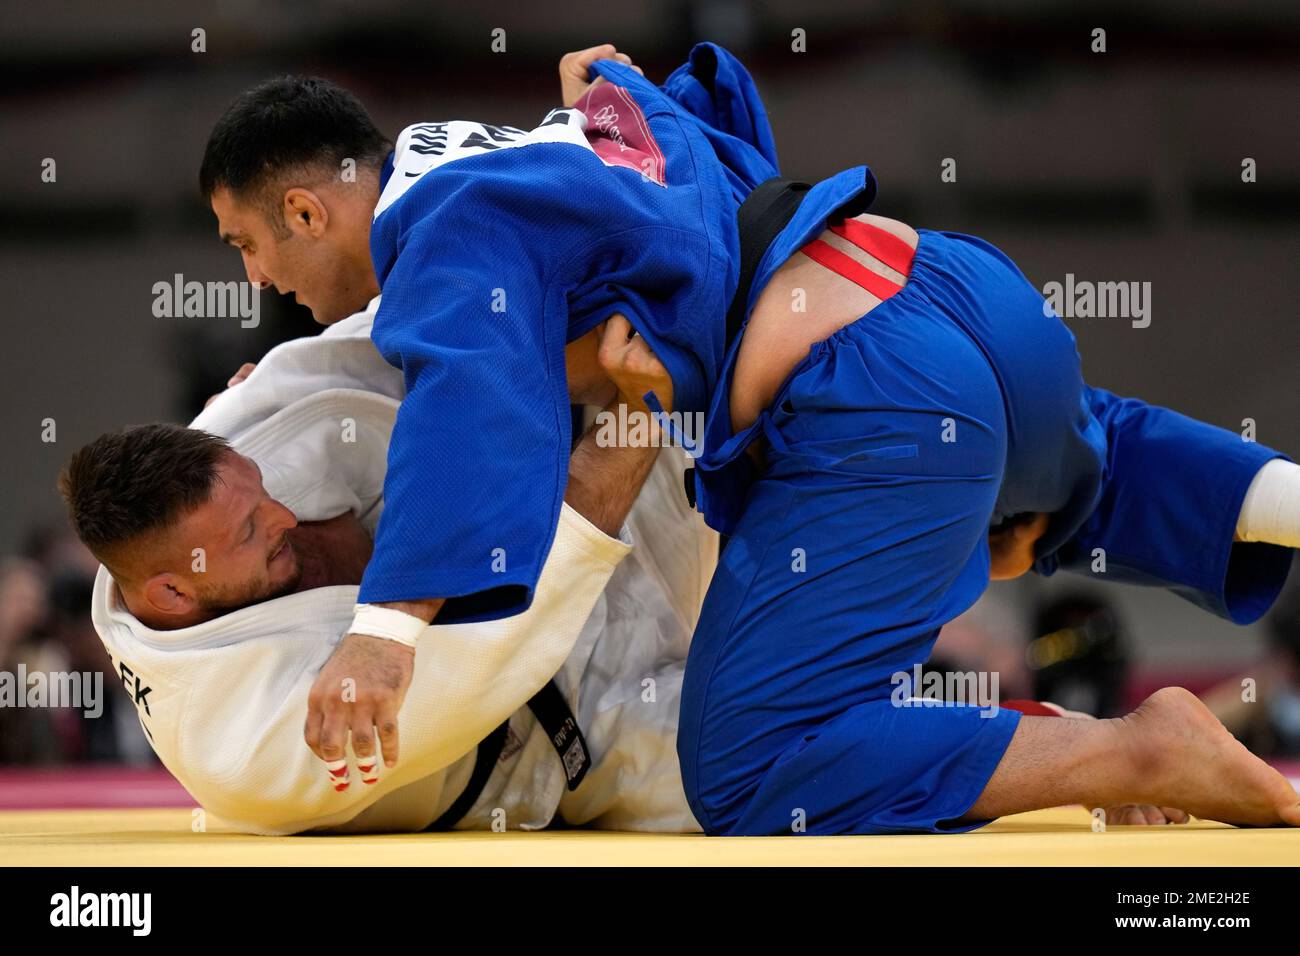 Javad Mahjoub of the Refugee Olympic Team, top, and Lukas Krpalek of the  Czech Republic compete during their men's +100kg elimination round judo  match at the 2020 Summer Olympics, Friday, July 30,